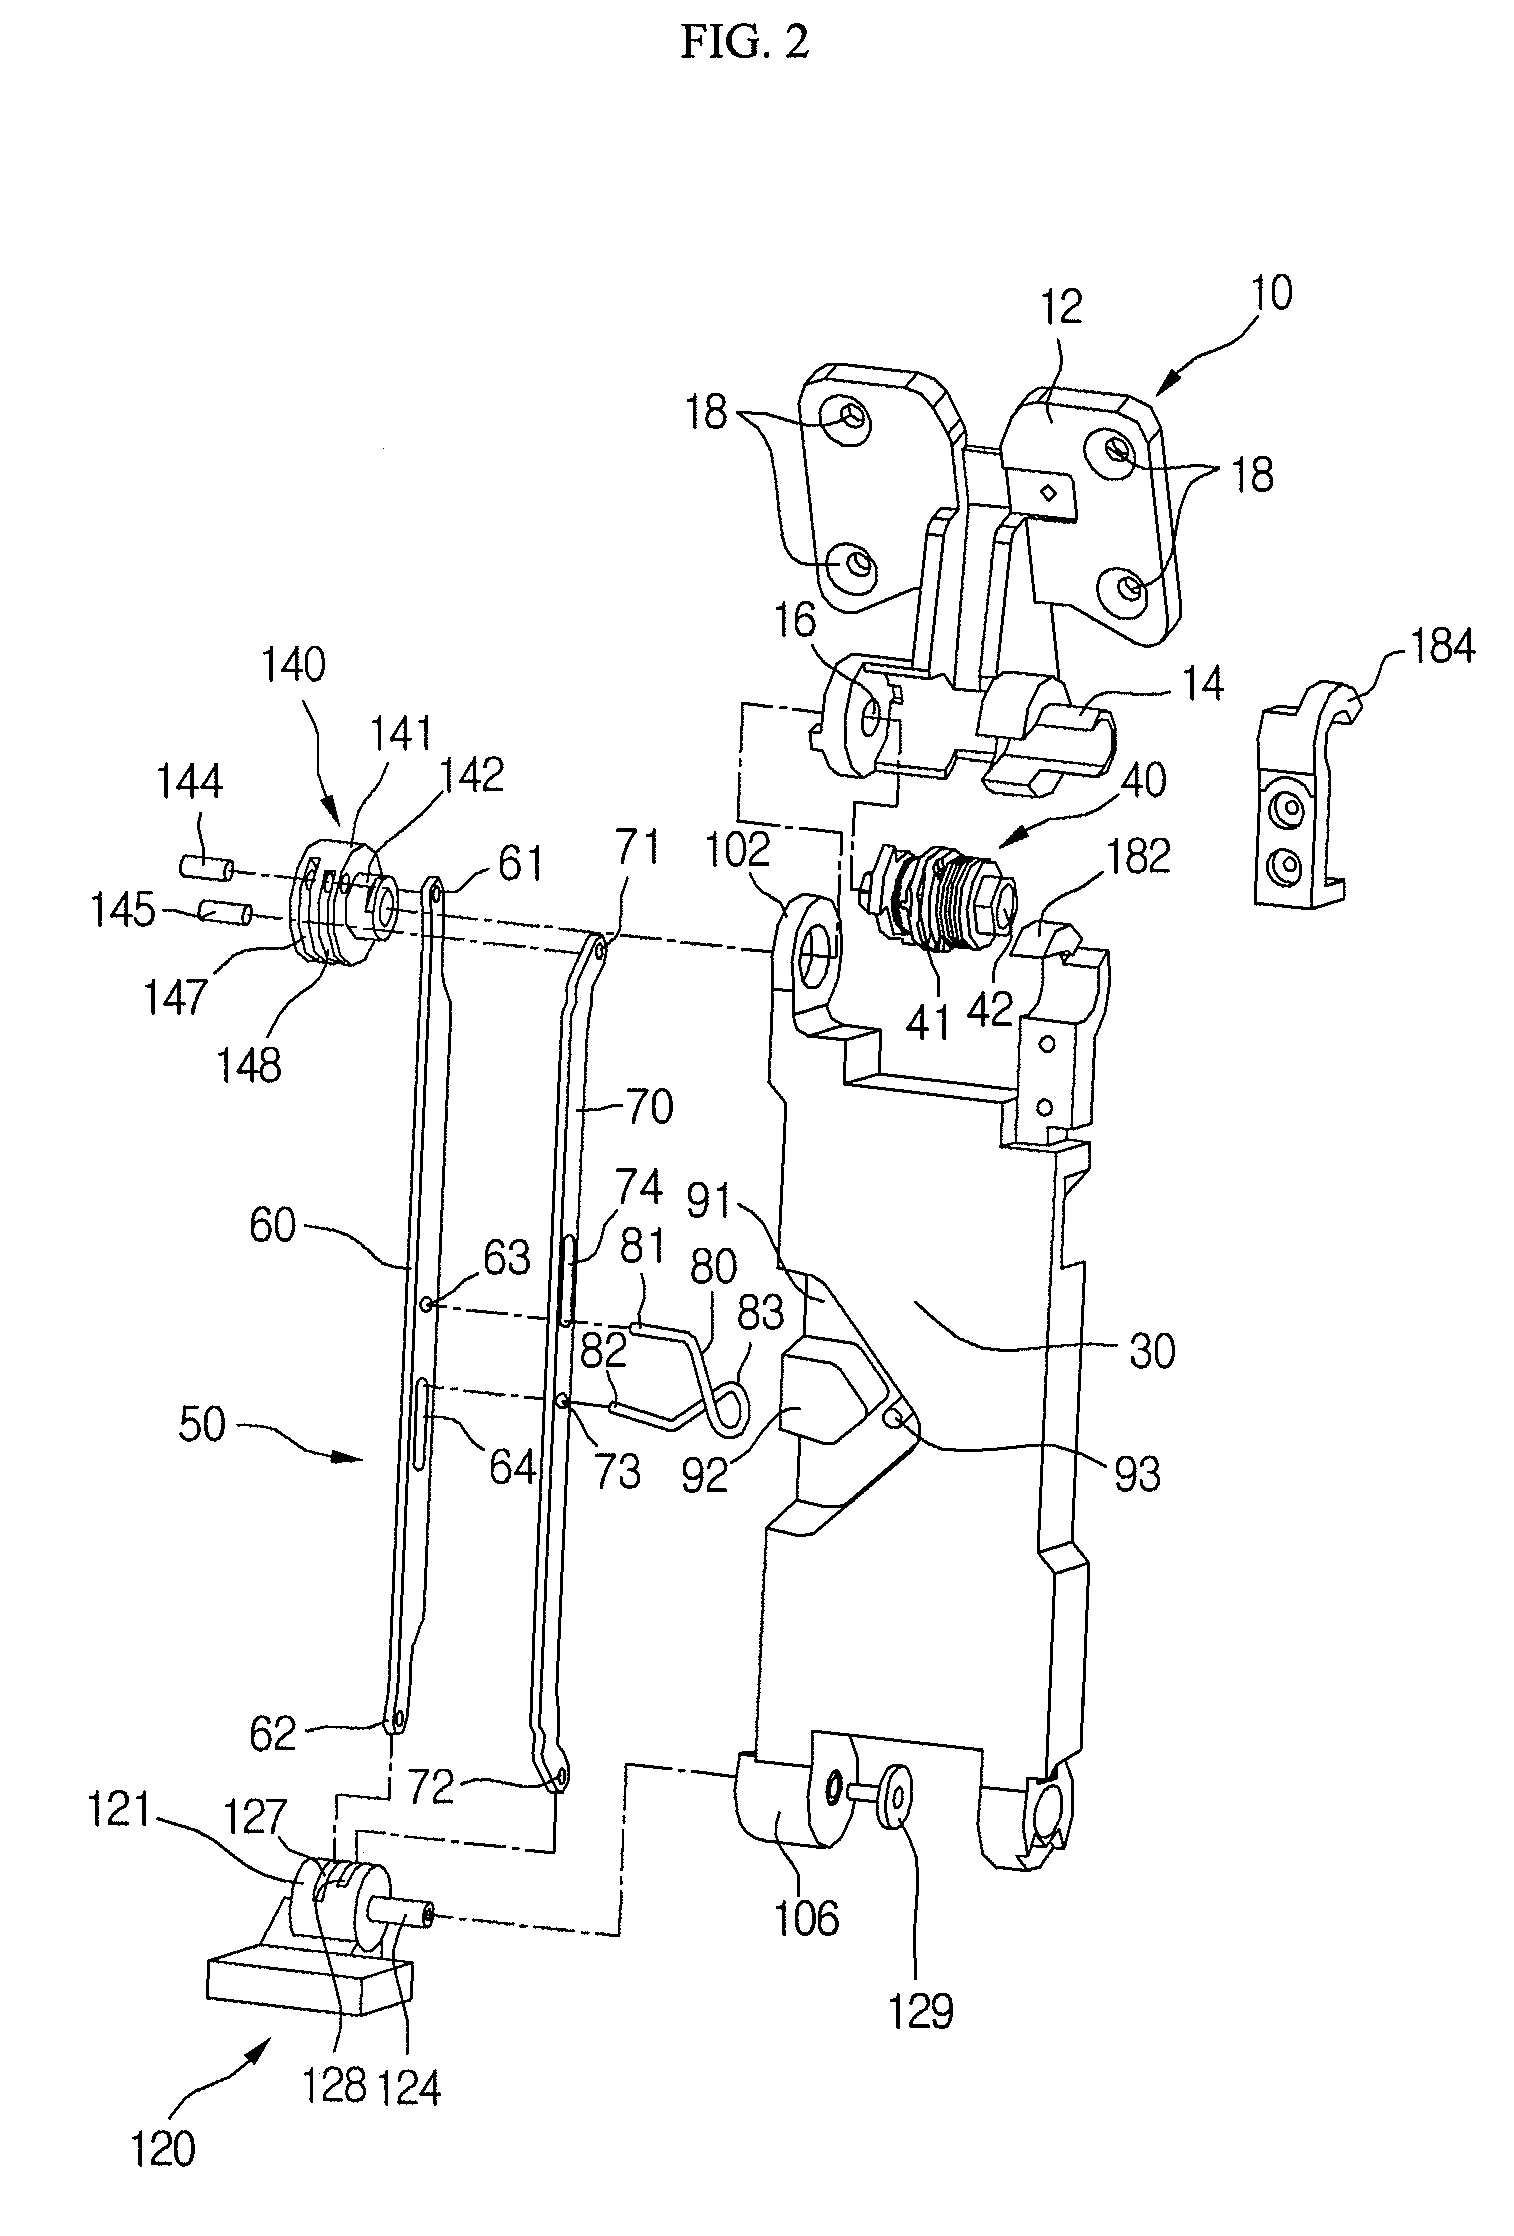 Stand for display device